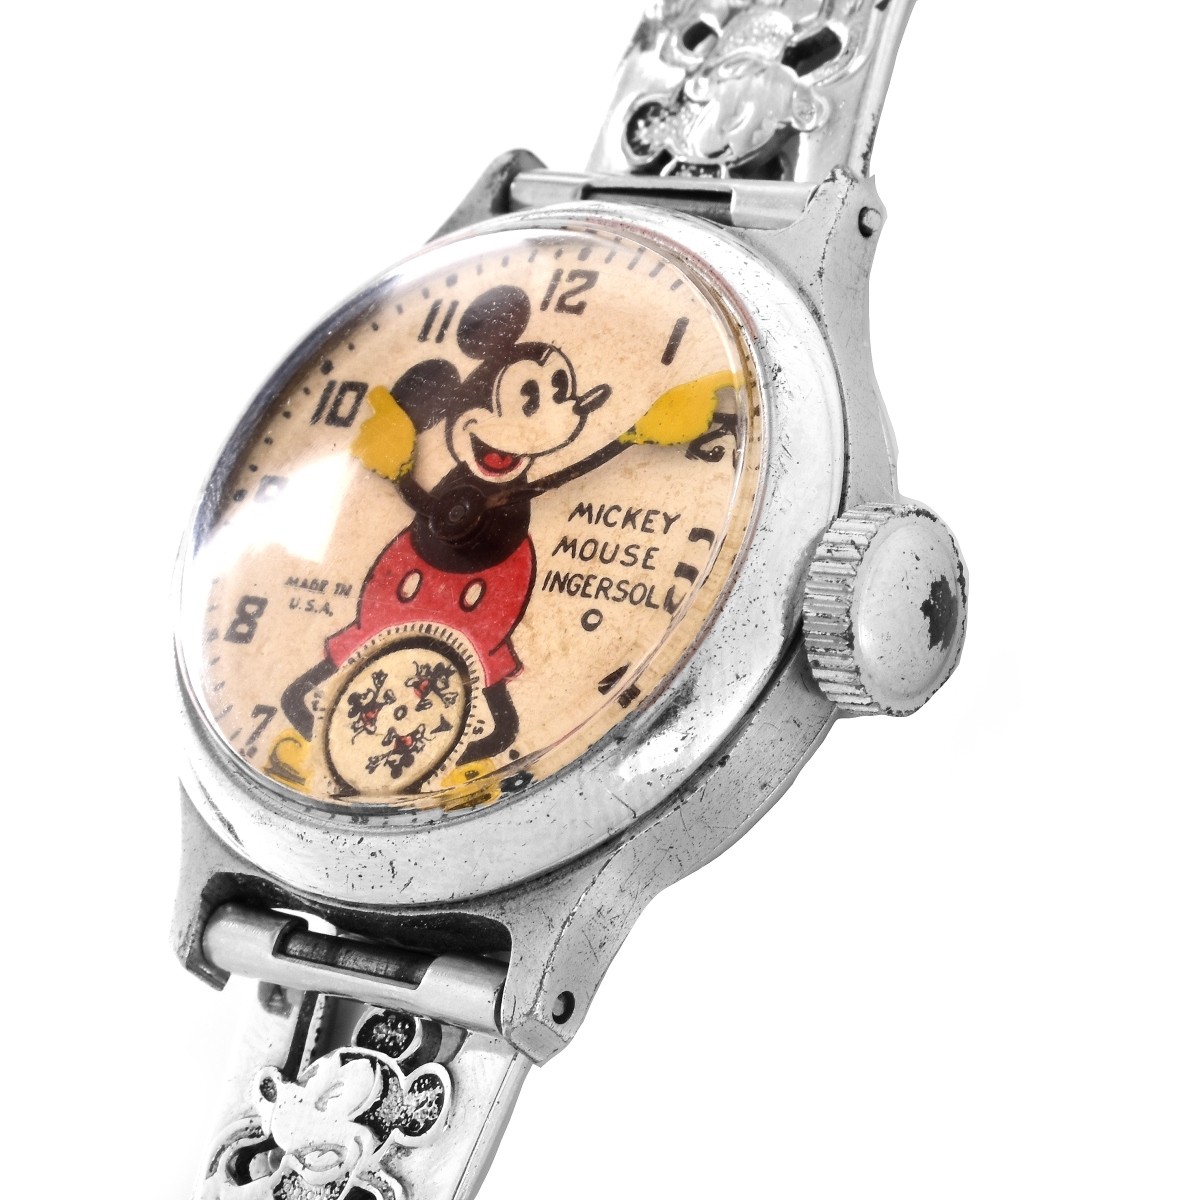 Ingersoll Mickey Mouse Watch